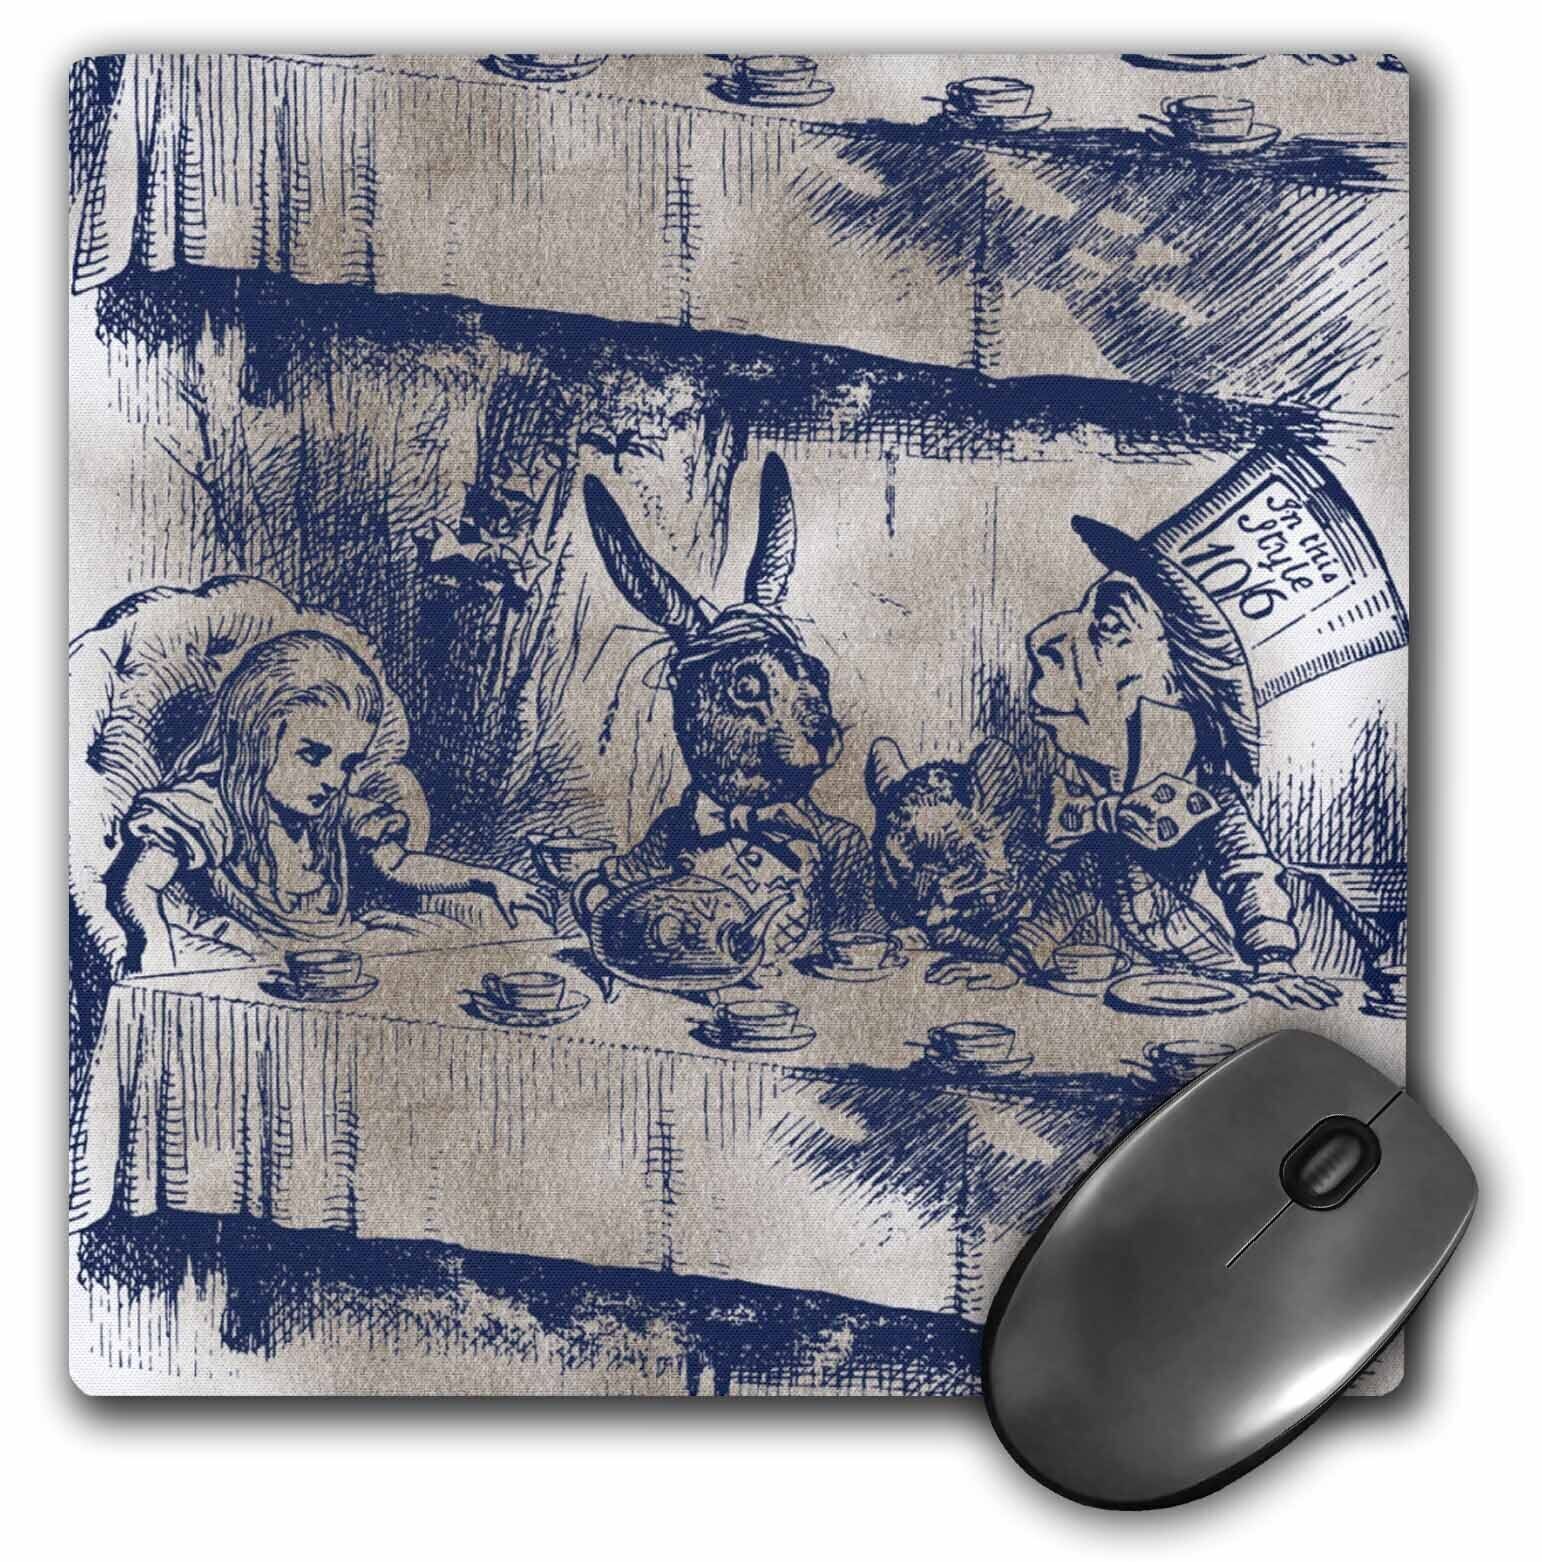 3dRose Alice in Wonderland Tea Party with Mad Hatter MousePad